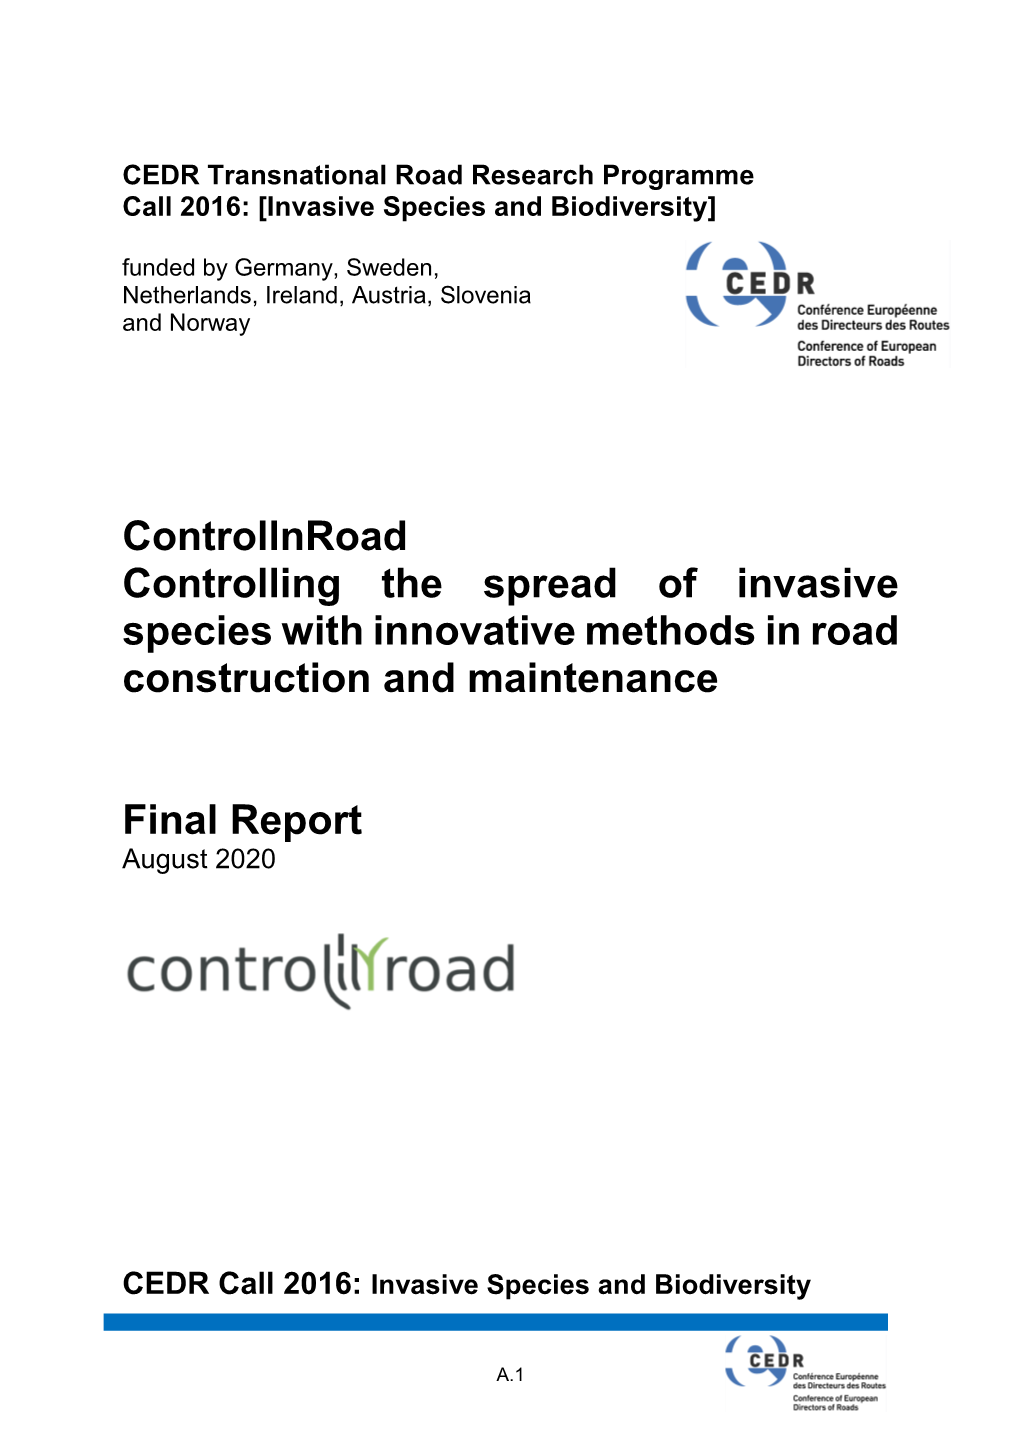 Controlling the Spread of Invasive Species with Innovative Methods in Road Construction and Maintenance